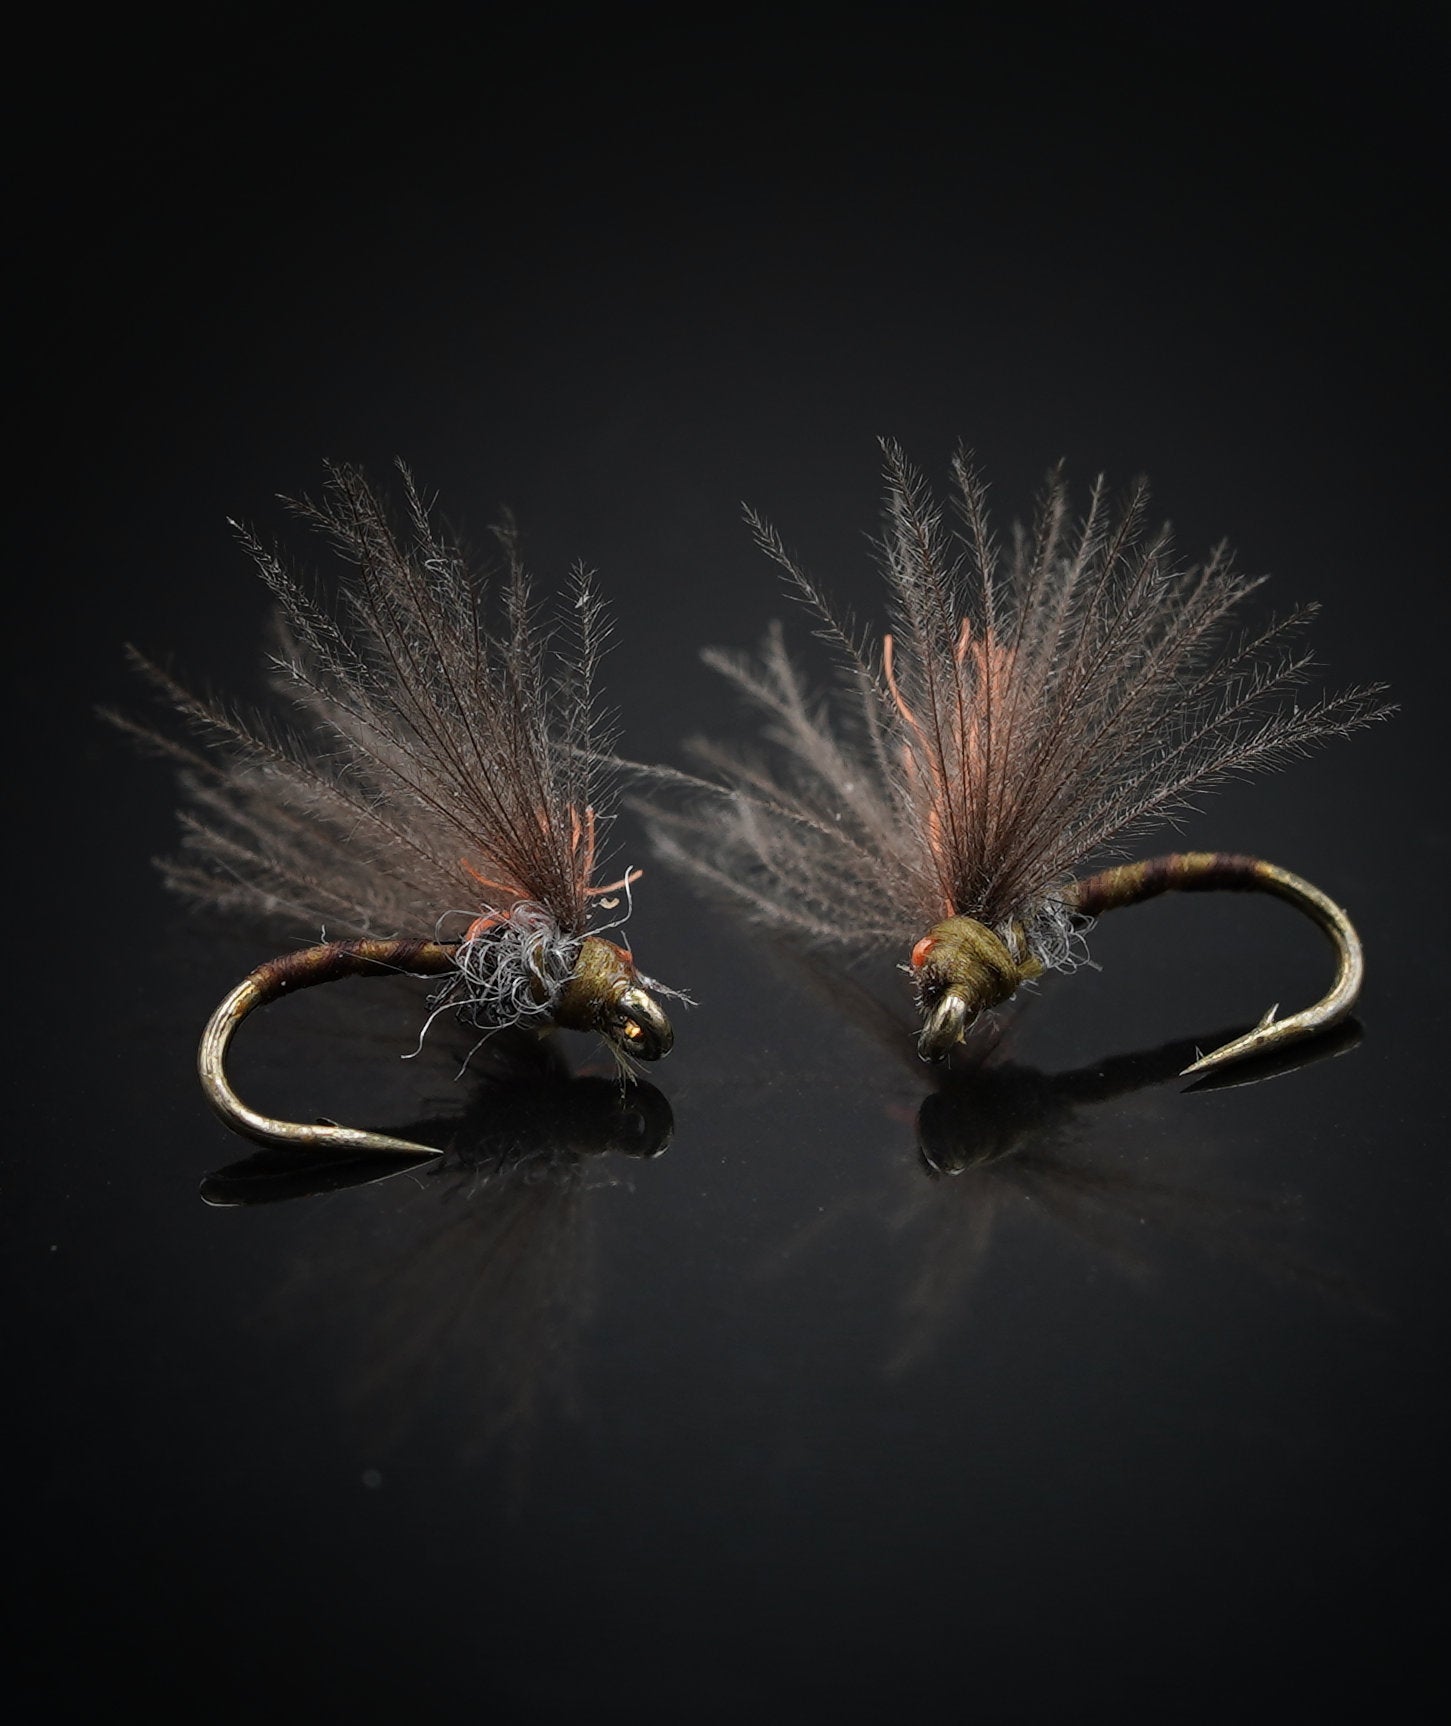 Fly Fishing Flies, 25 Patterns, 50 Flies with Fly Box